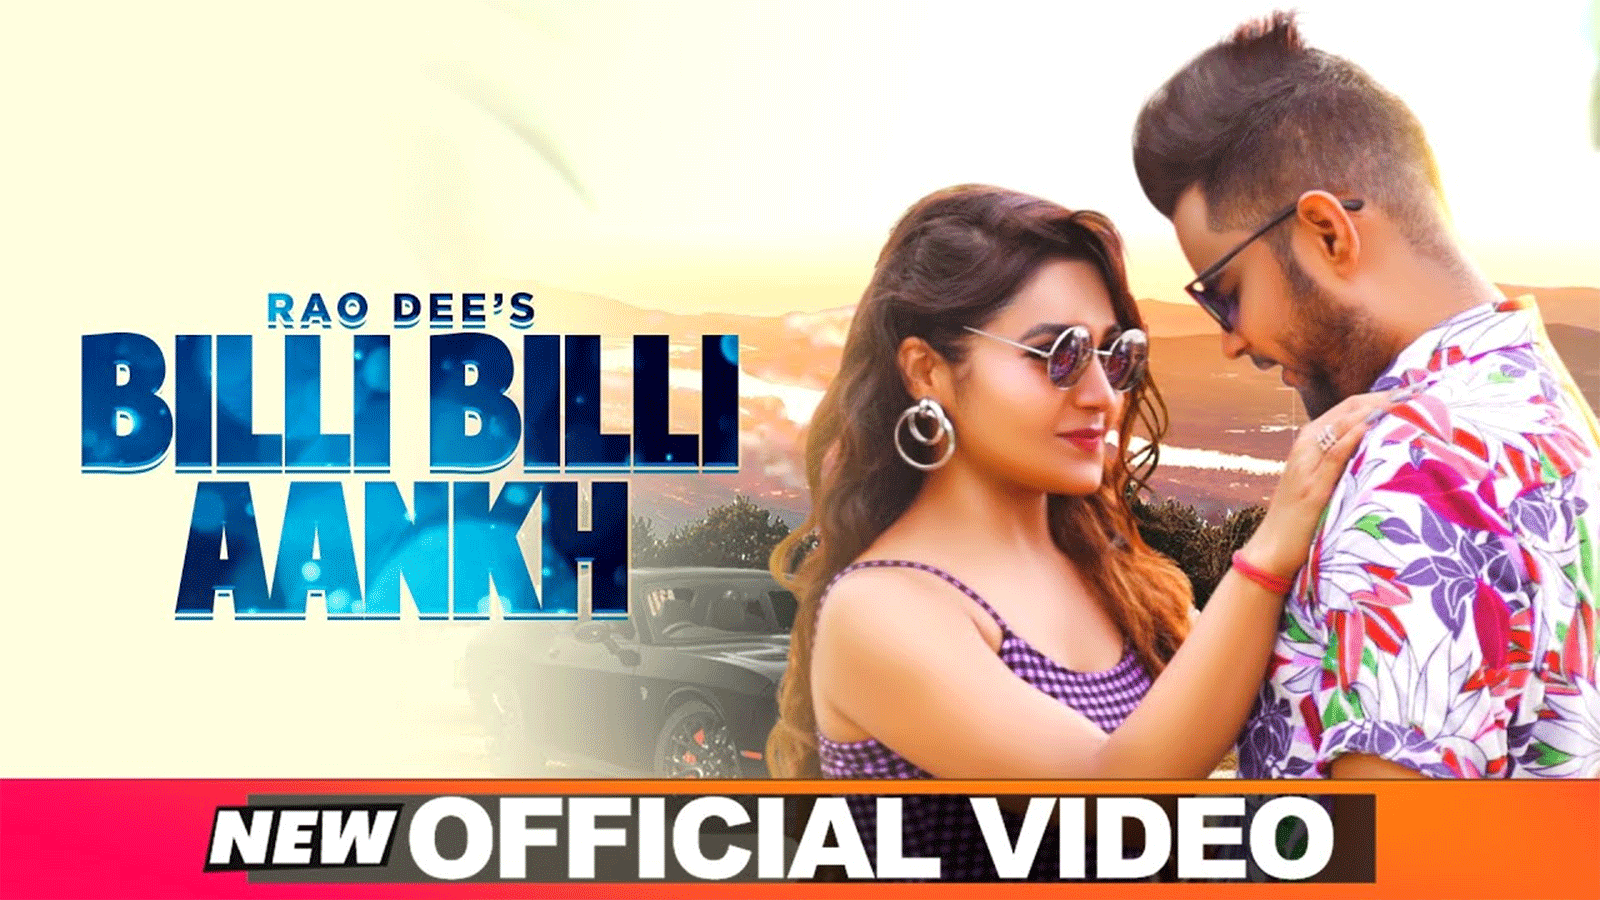 Watch Out Popular 'Haryanvi' Song Music Video - 'Billi Billi Aankh' Sung by  Rao Dee | Haryanvi Video Songs - Times of India